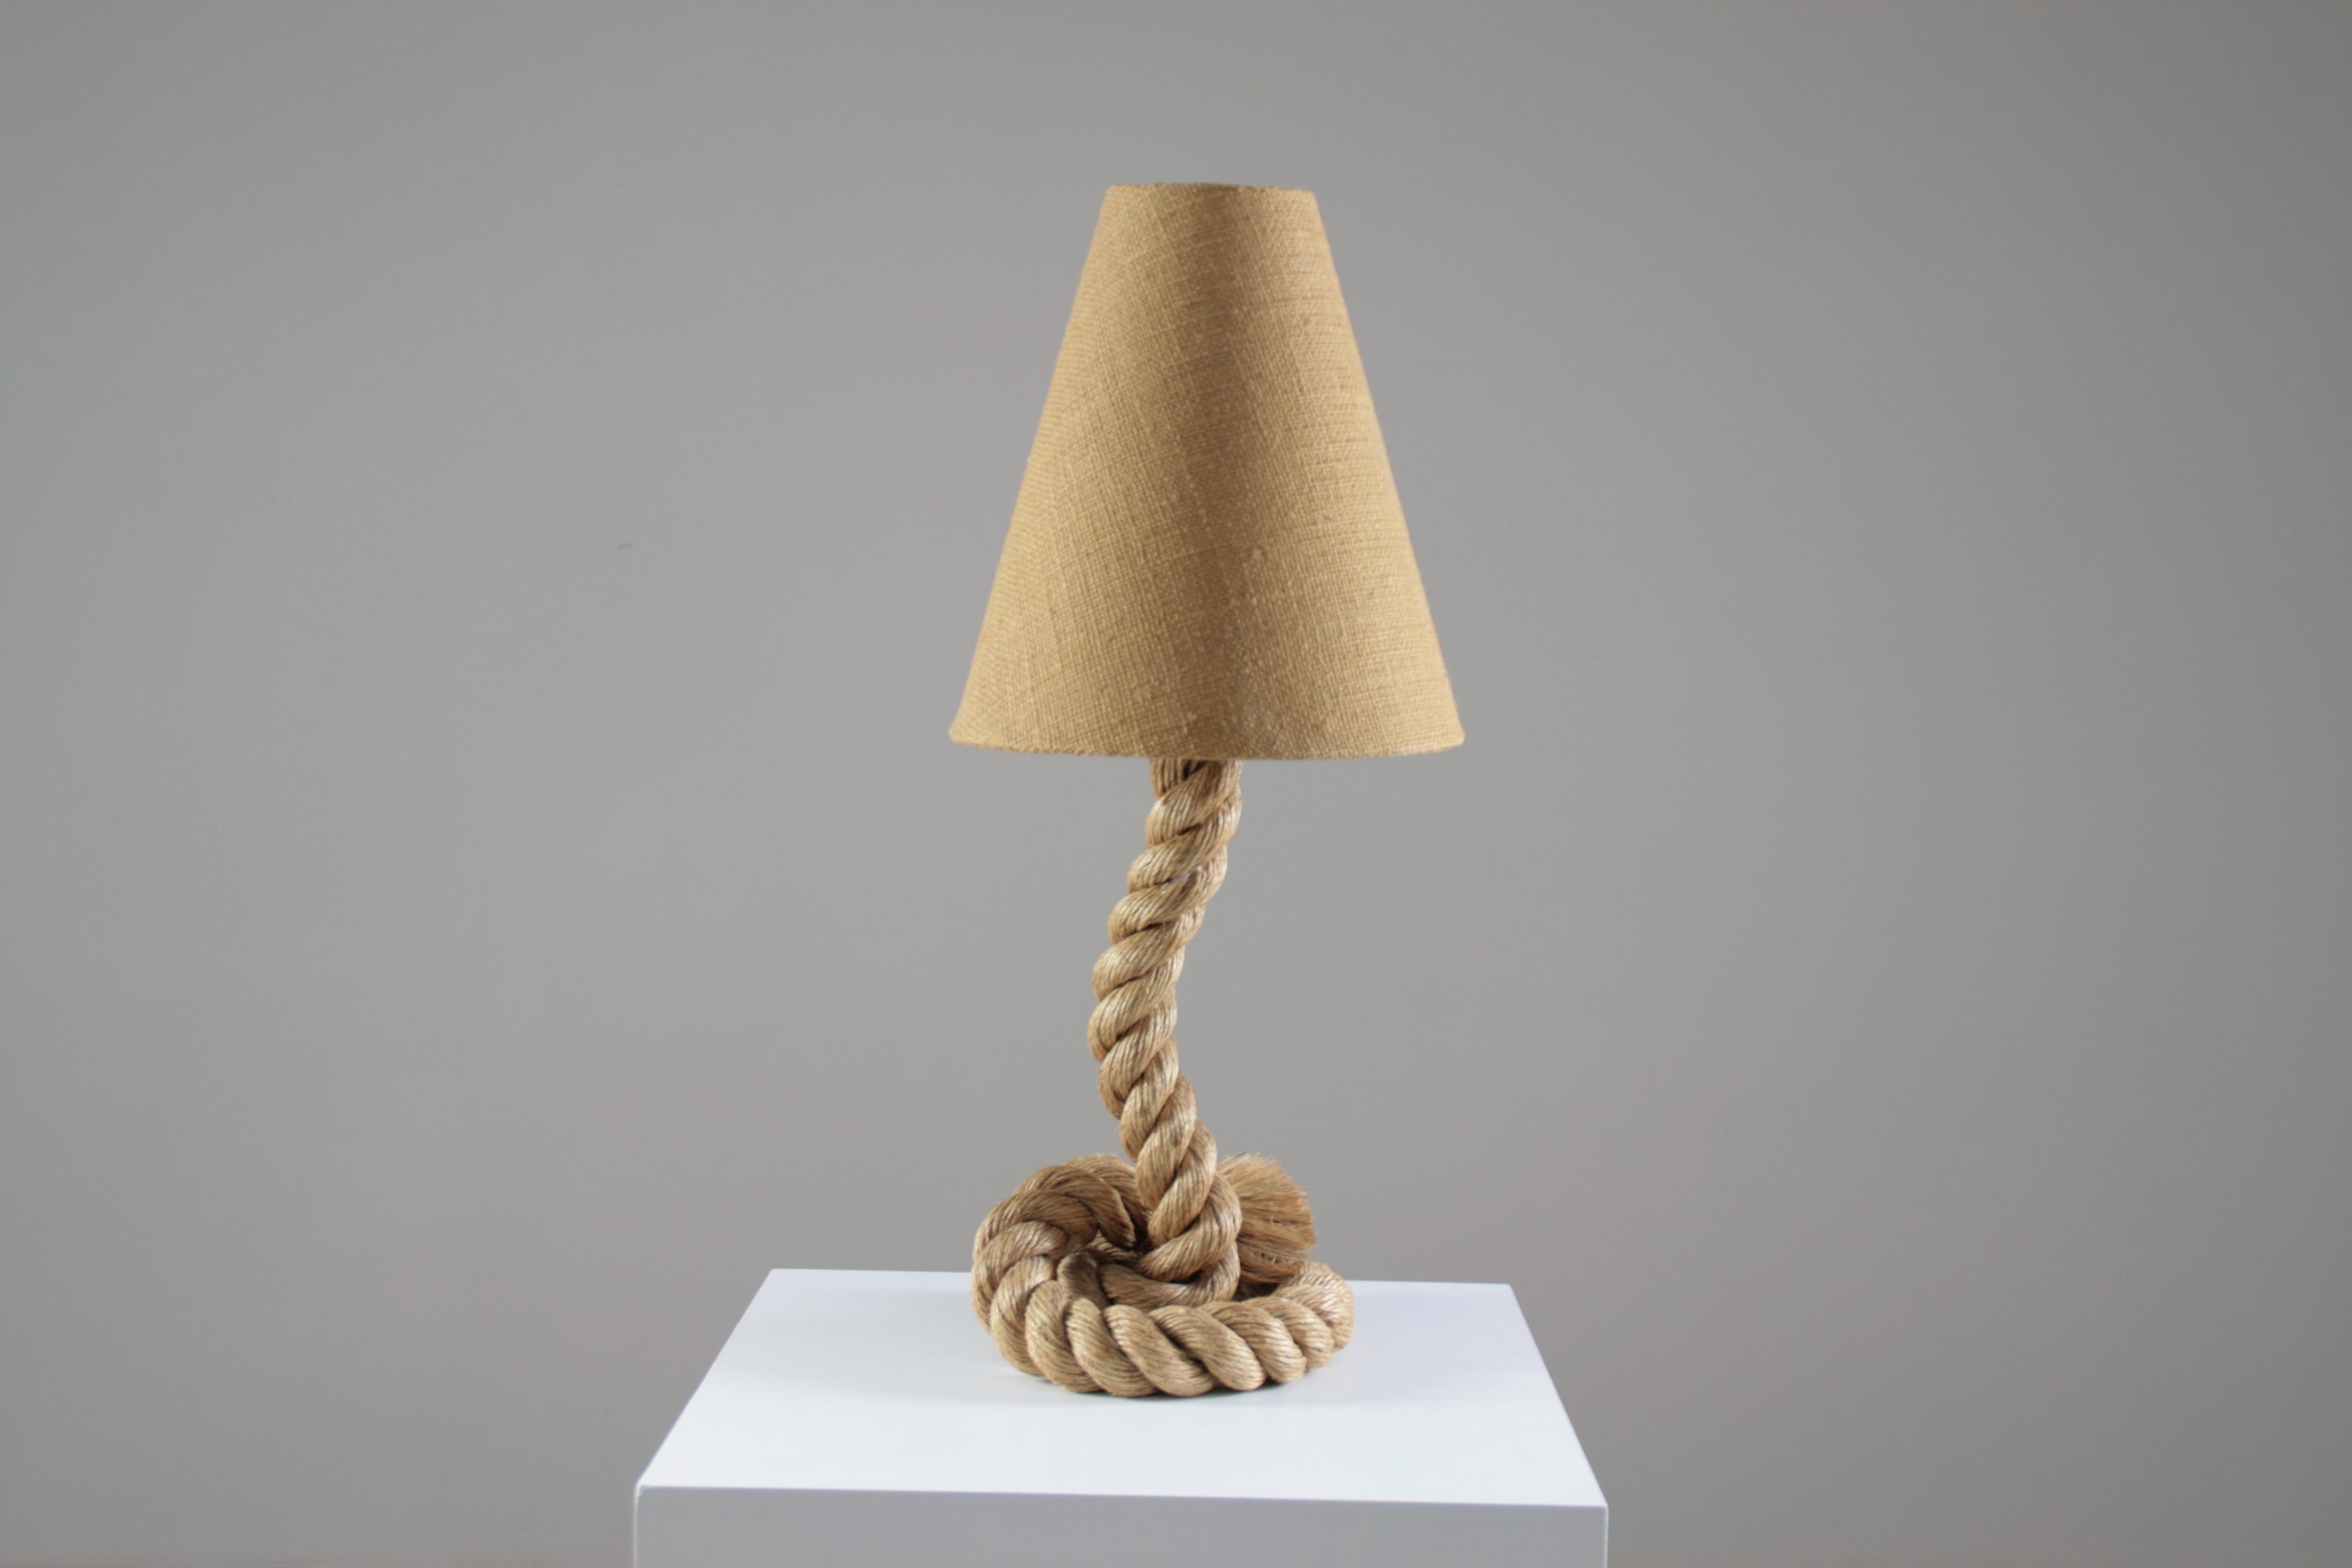 Rope table lamp and jute shade by French designers Adrien Audoux & Frida Minet, produced in the 1950s. The power supply crossing the rope was redone few years ago to be current standards. European plug.
Dimensions:
- Total height 70cm
- diameter of